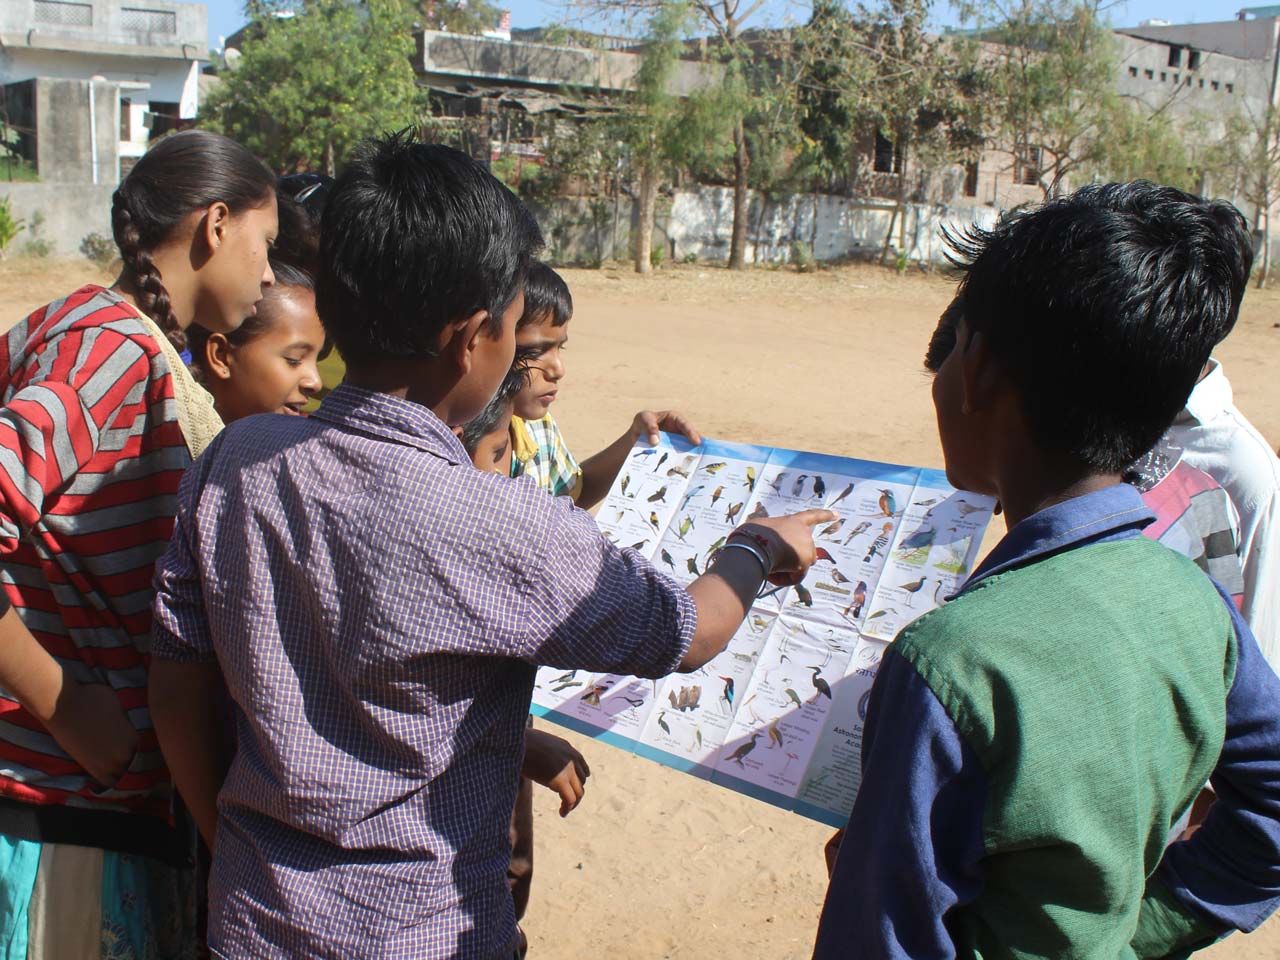 Young people birding in India work at identifying birds using a fold-out guide